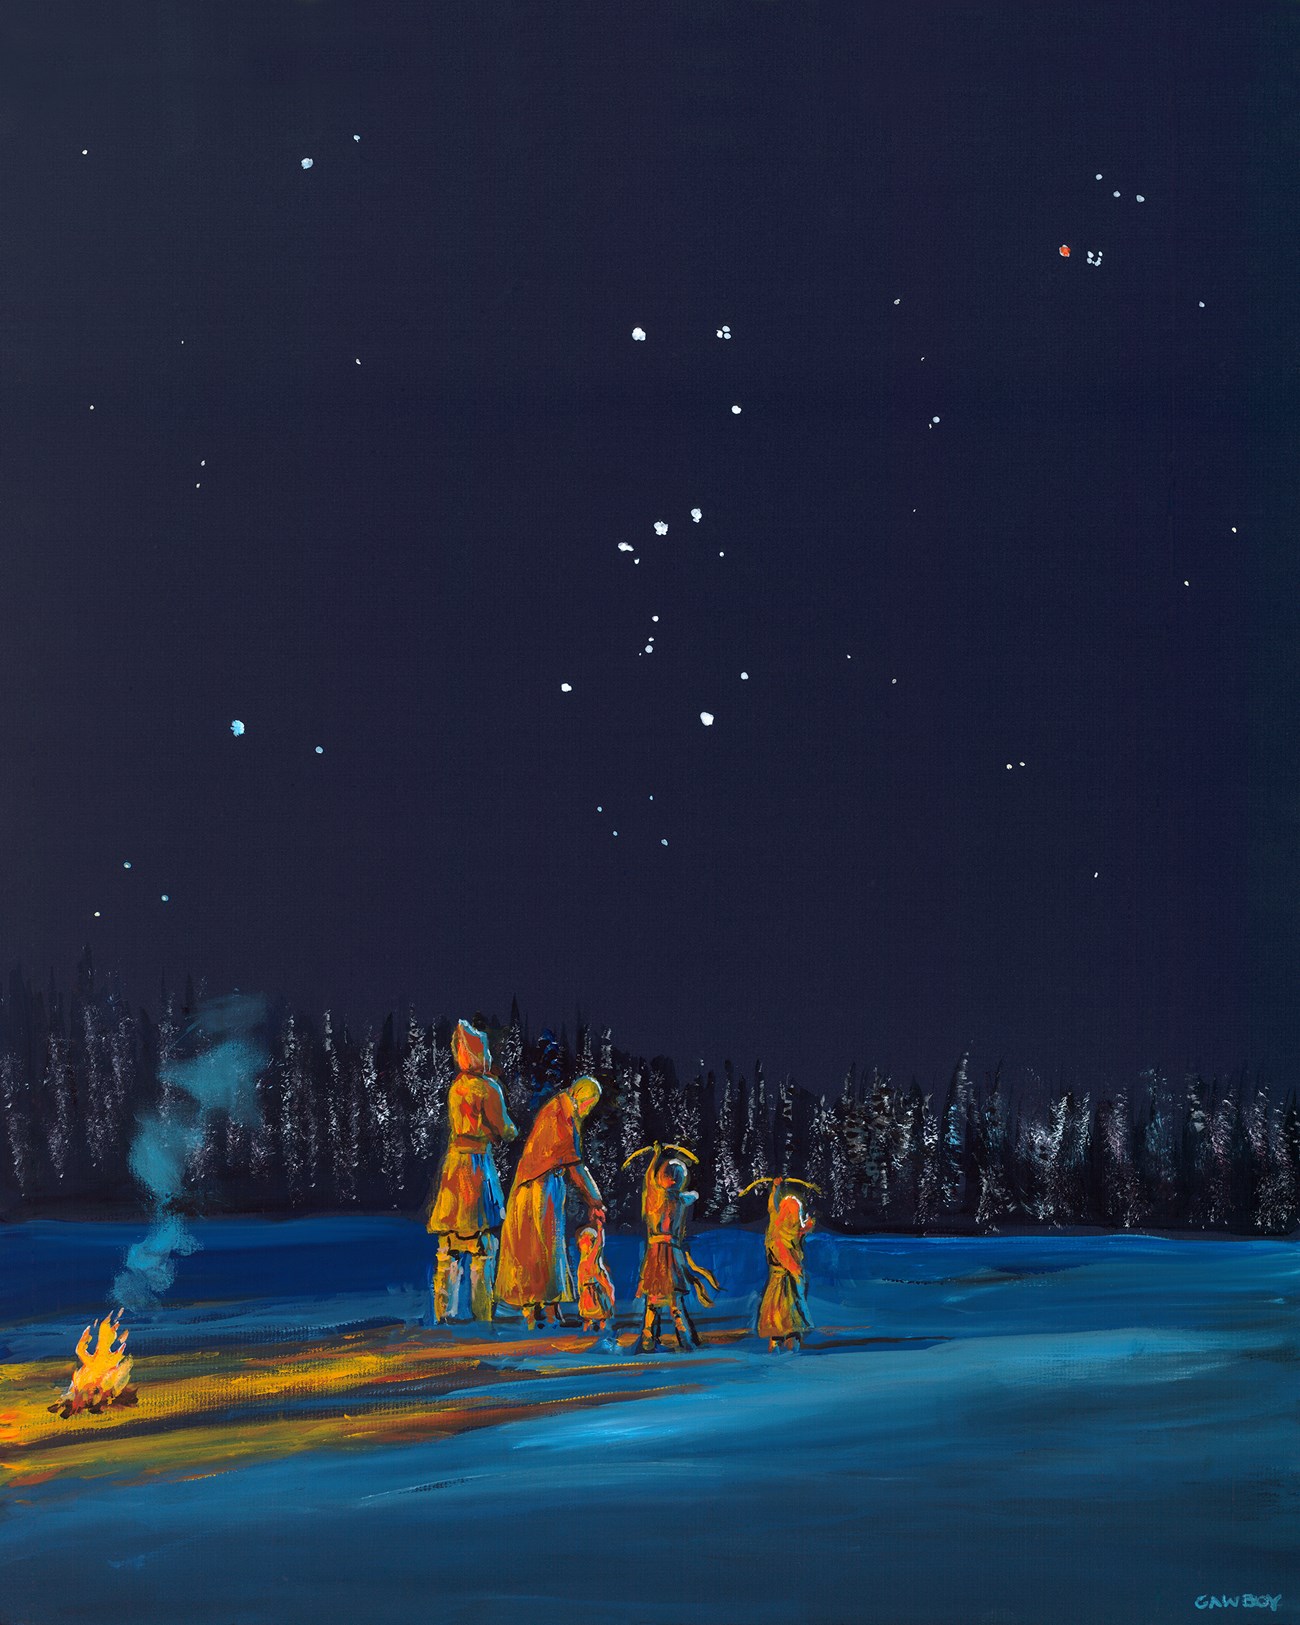 A dark painting with glowing orange figures near a campfire, shooting an arrow toward the sky.